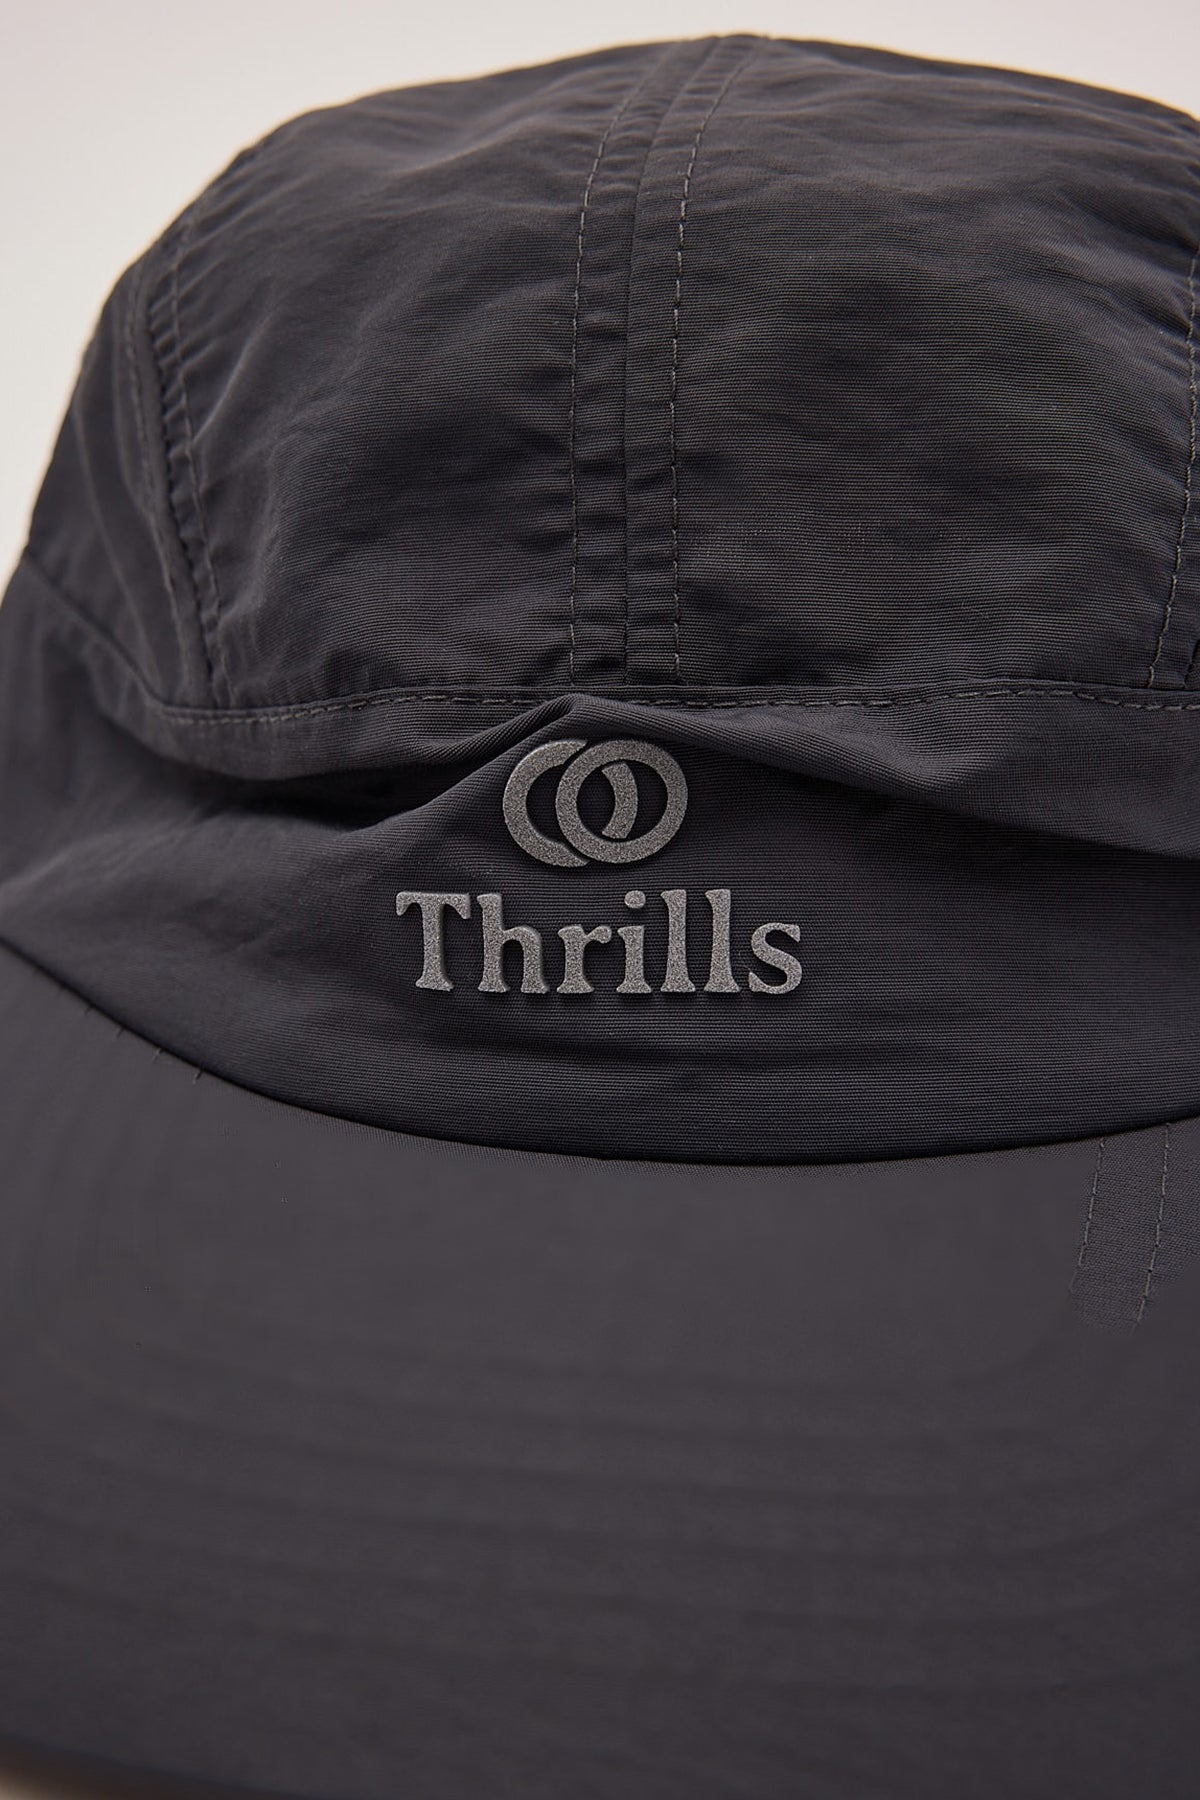 Thrills Arts and Industrial Curved 5 Panel Cap Ebony